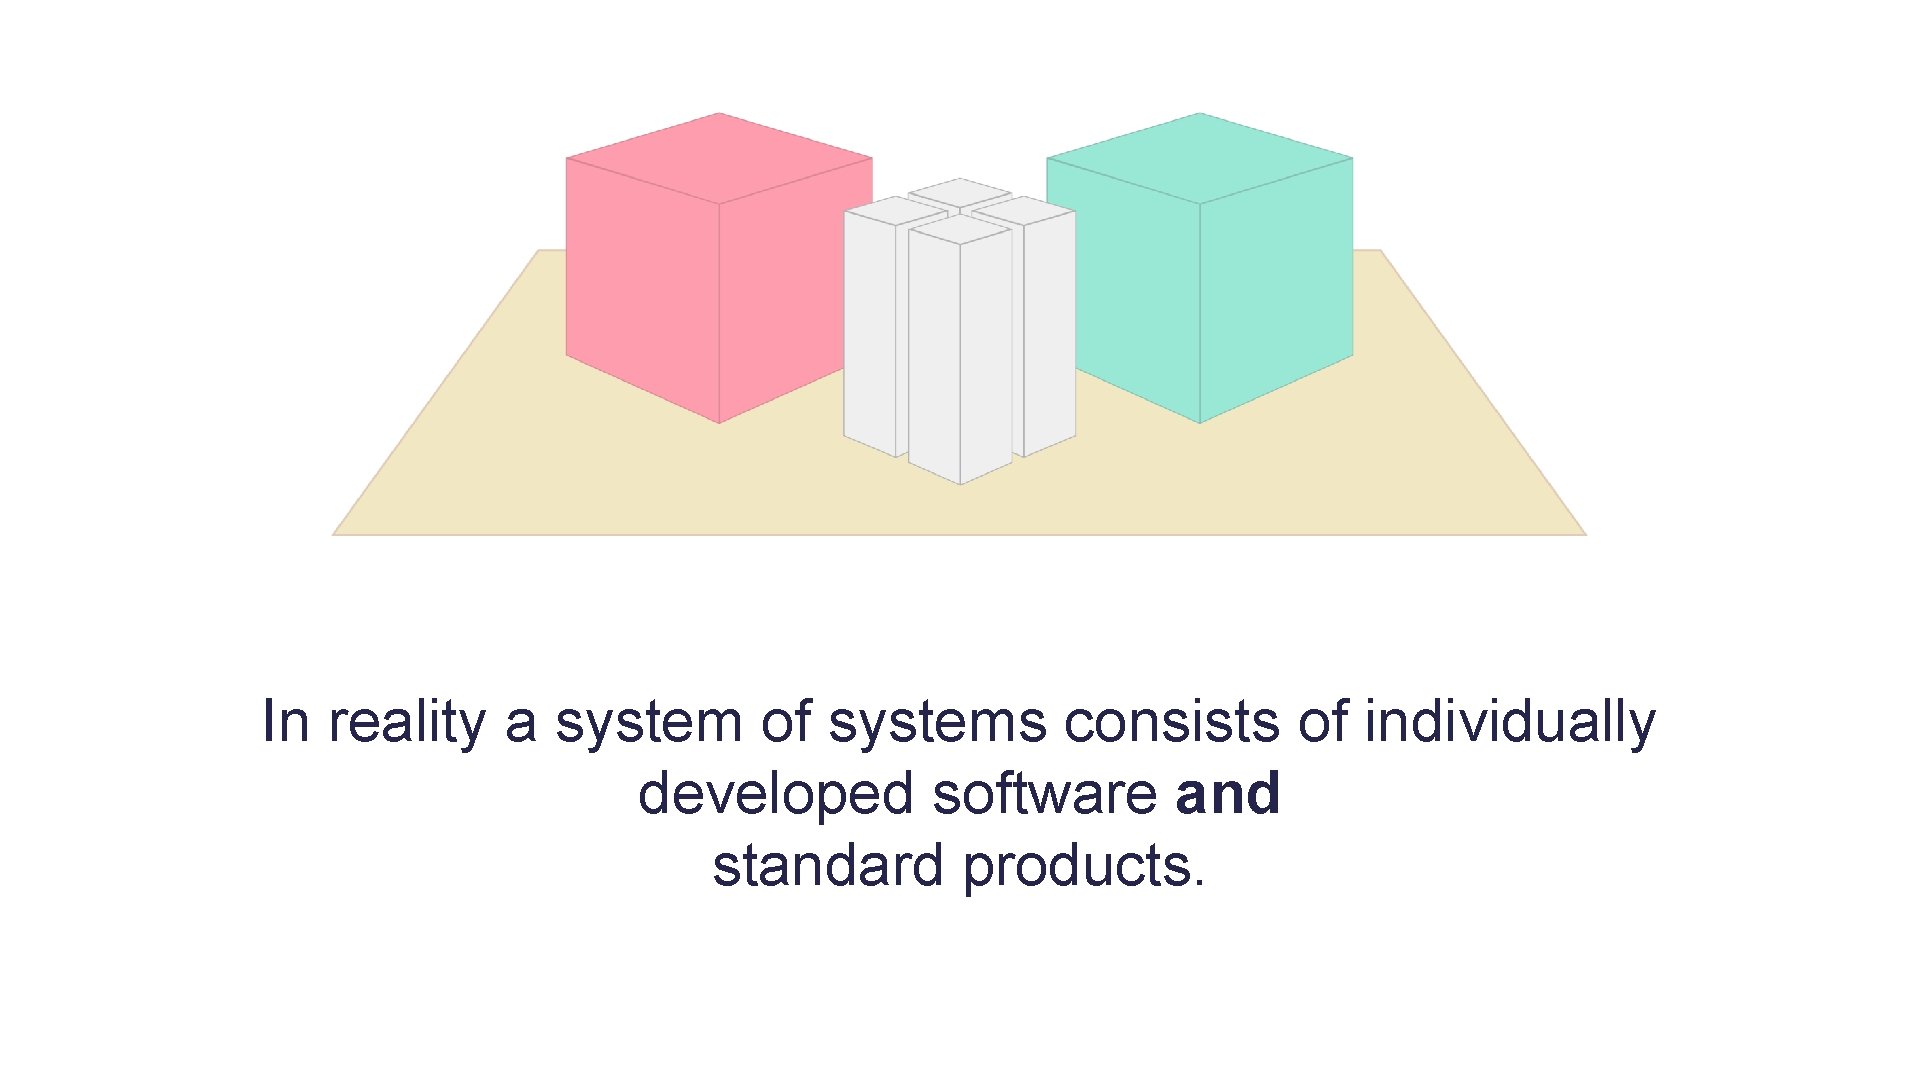 In reality a system of systems consists of individually developed software and standard products.